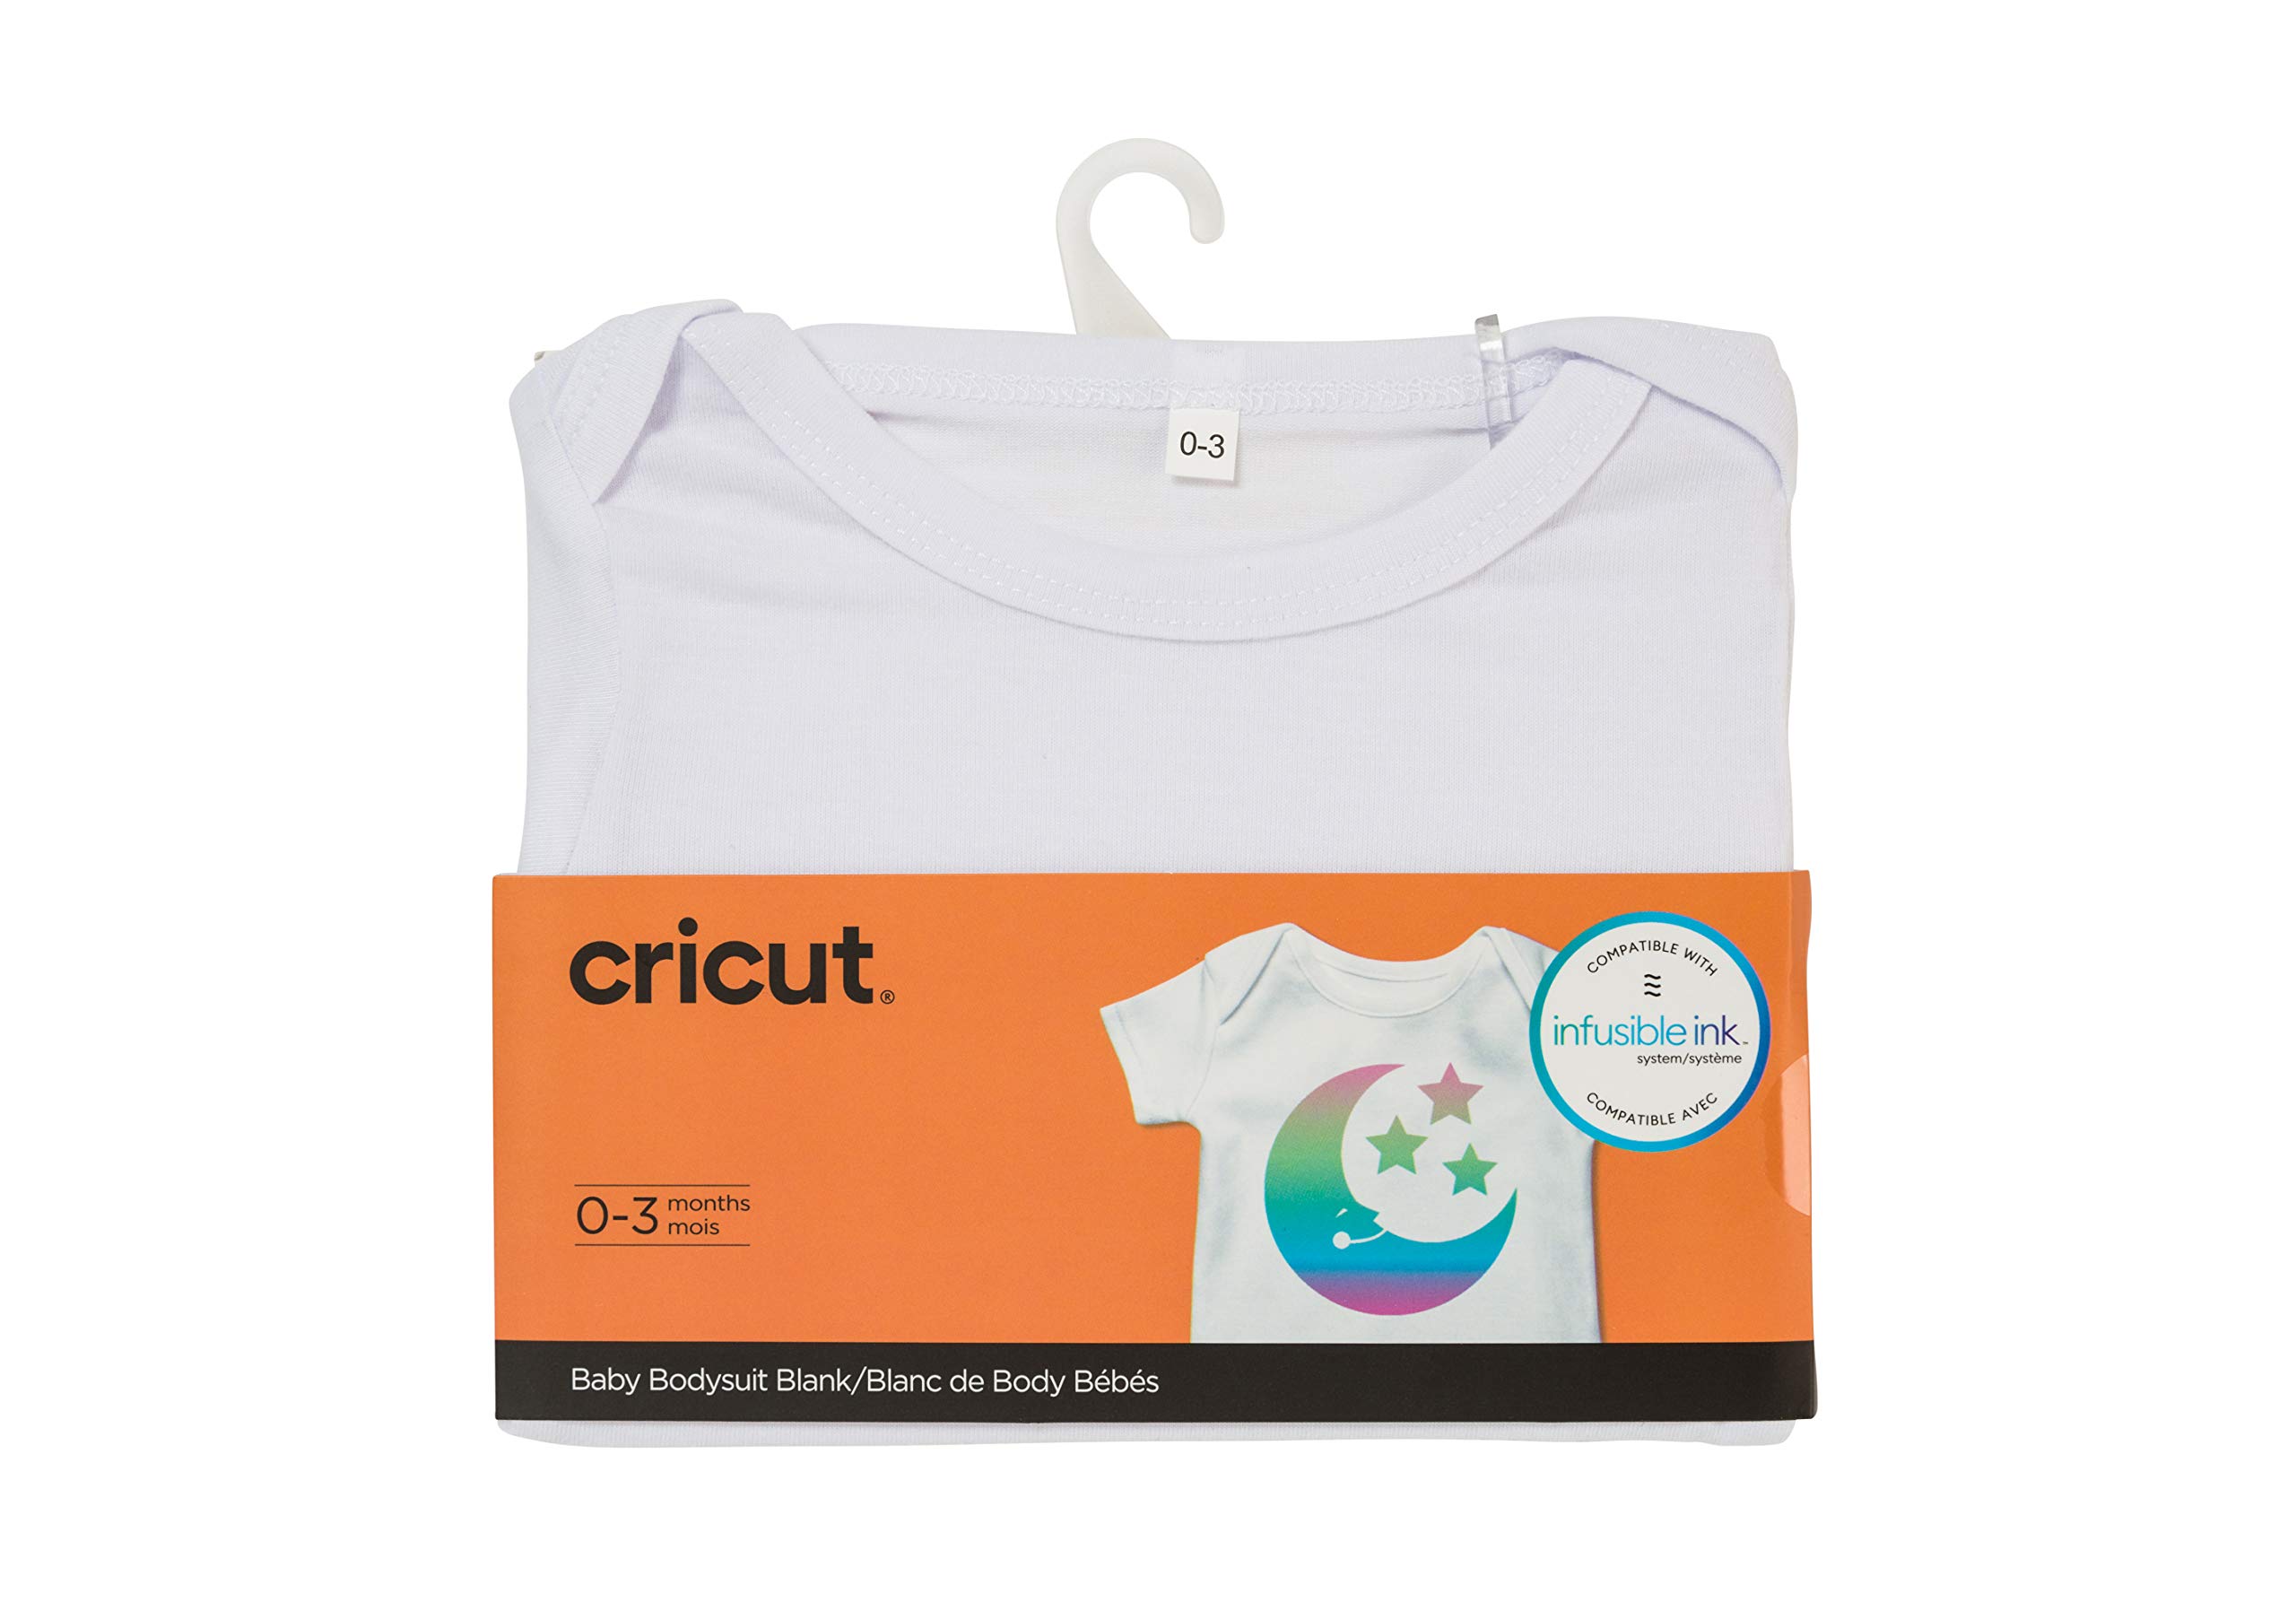 Cricut womens Baby Bodysuit BLANK BODY SUIT 0 3 MONTH, White, 0-3 Months US, 1 Count (Pack of 1)